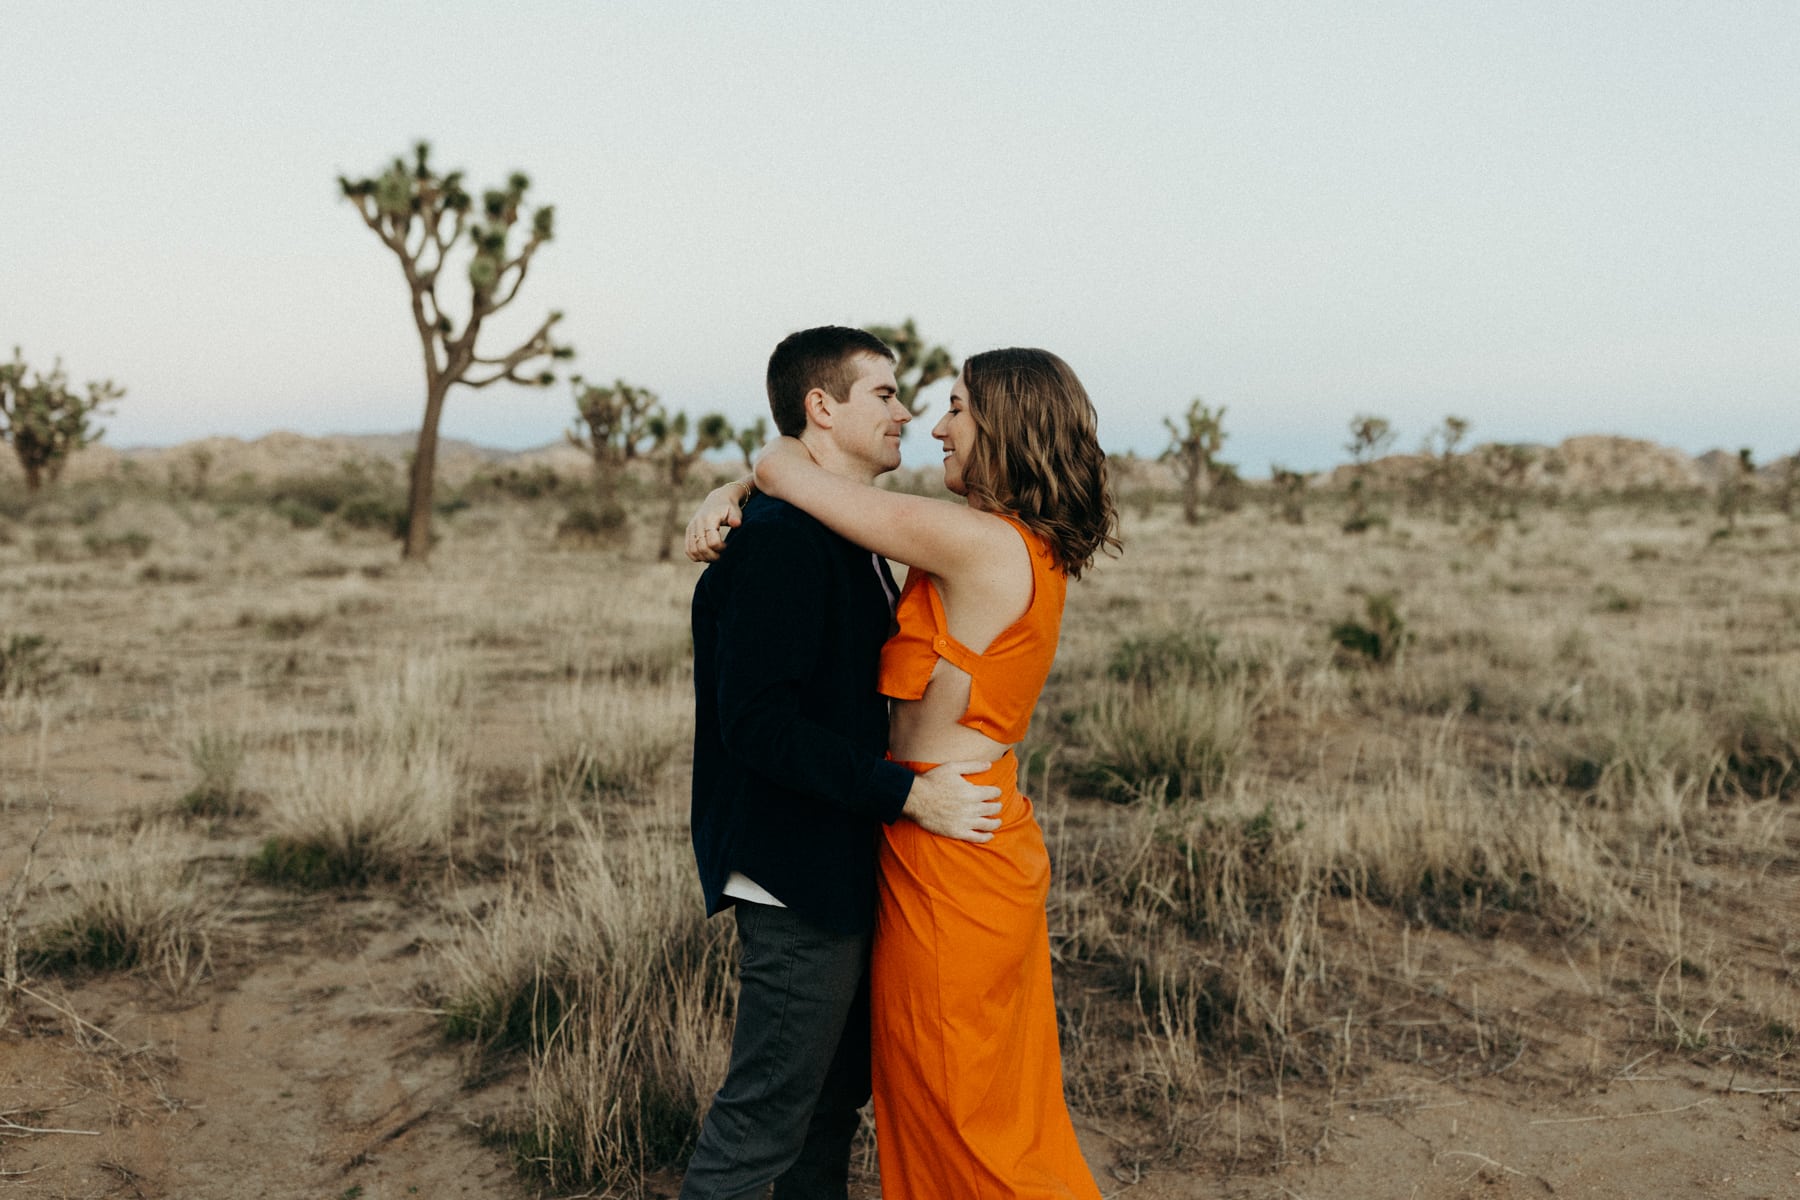 couple snuggling in the desert with the woman wearing a bright orange outfit